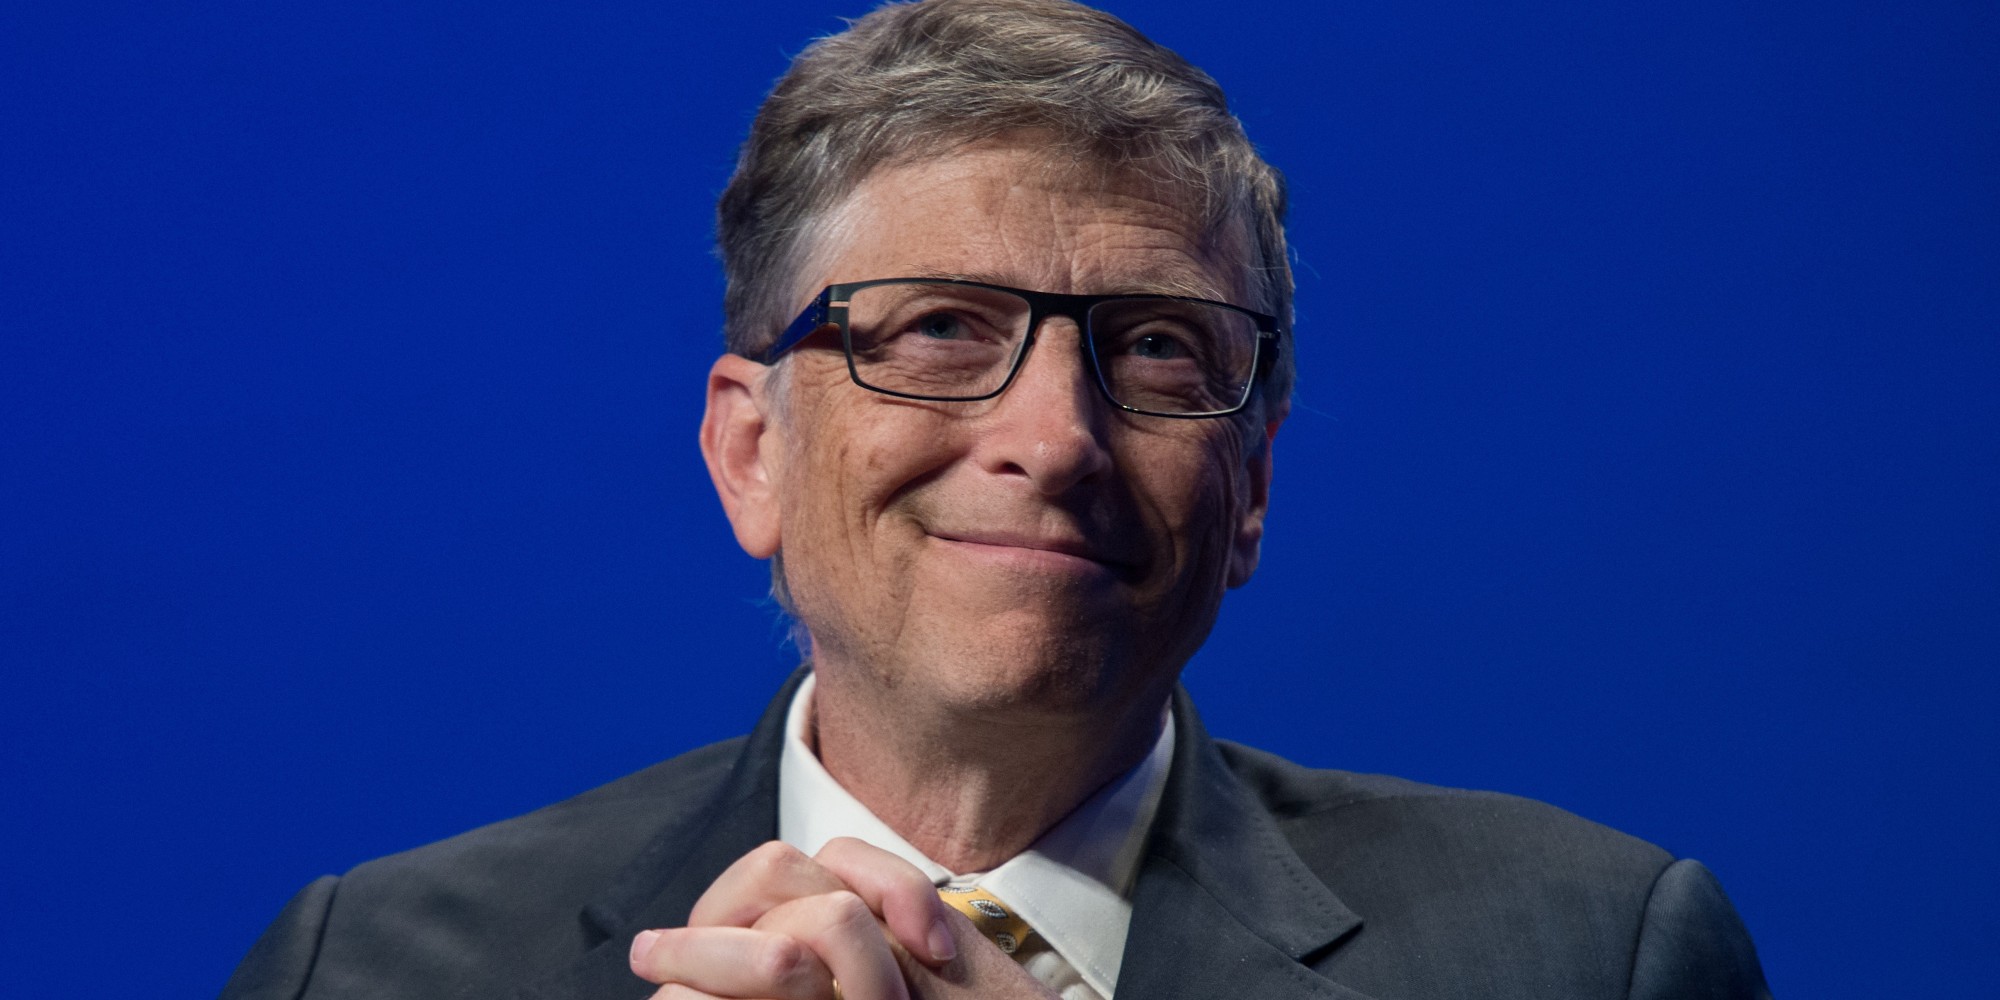 Bill Gates' Approach To Ending Global Poverty Won't Work, Economist ...